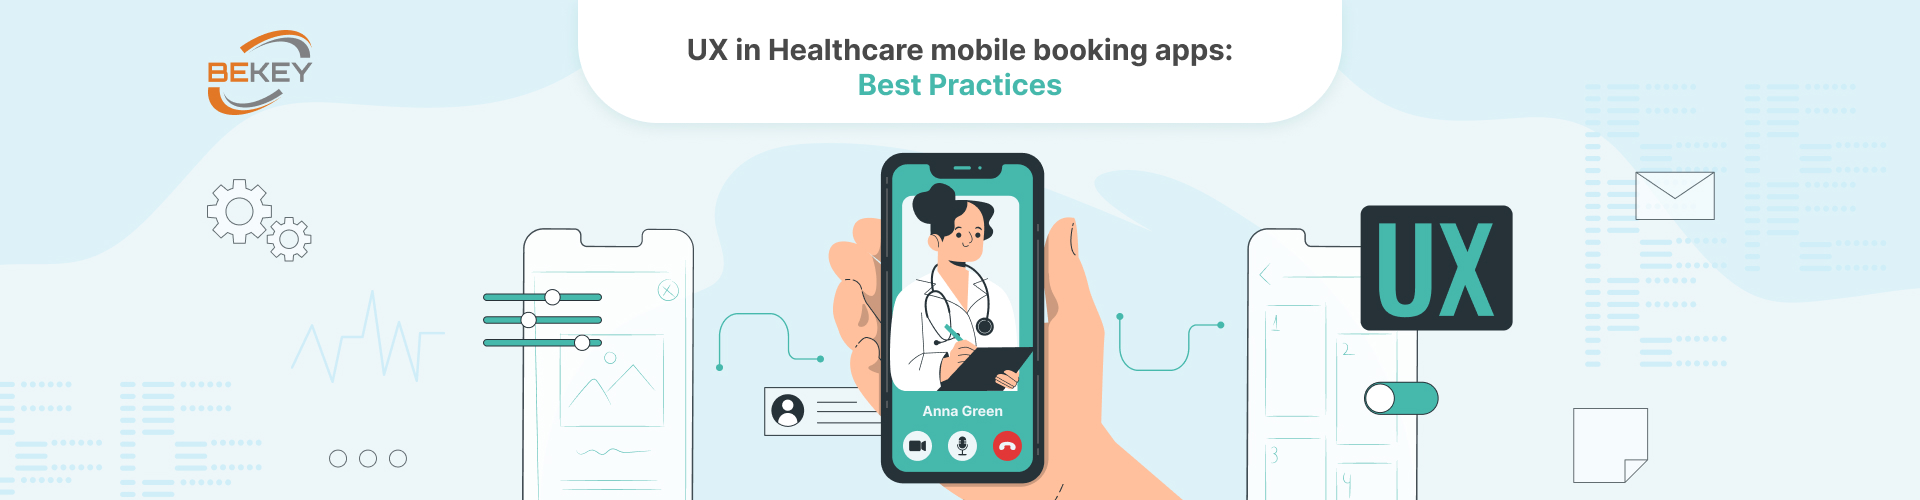 UX in Healthcare mobile booking apps